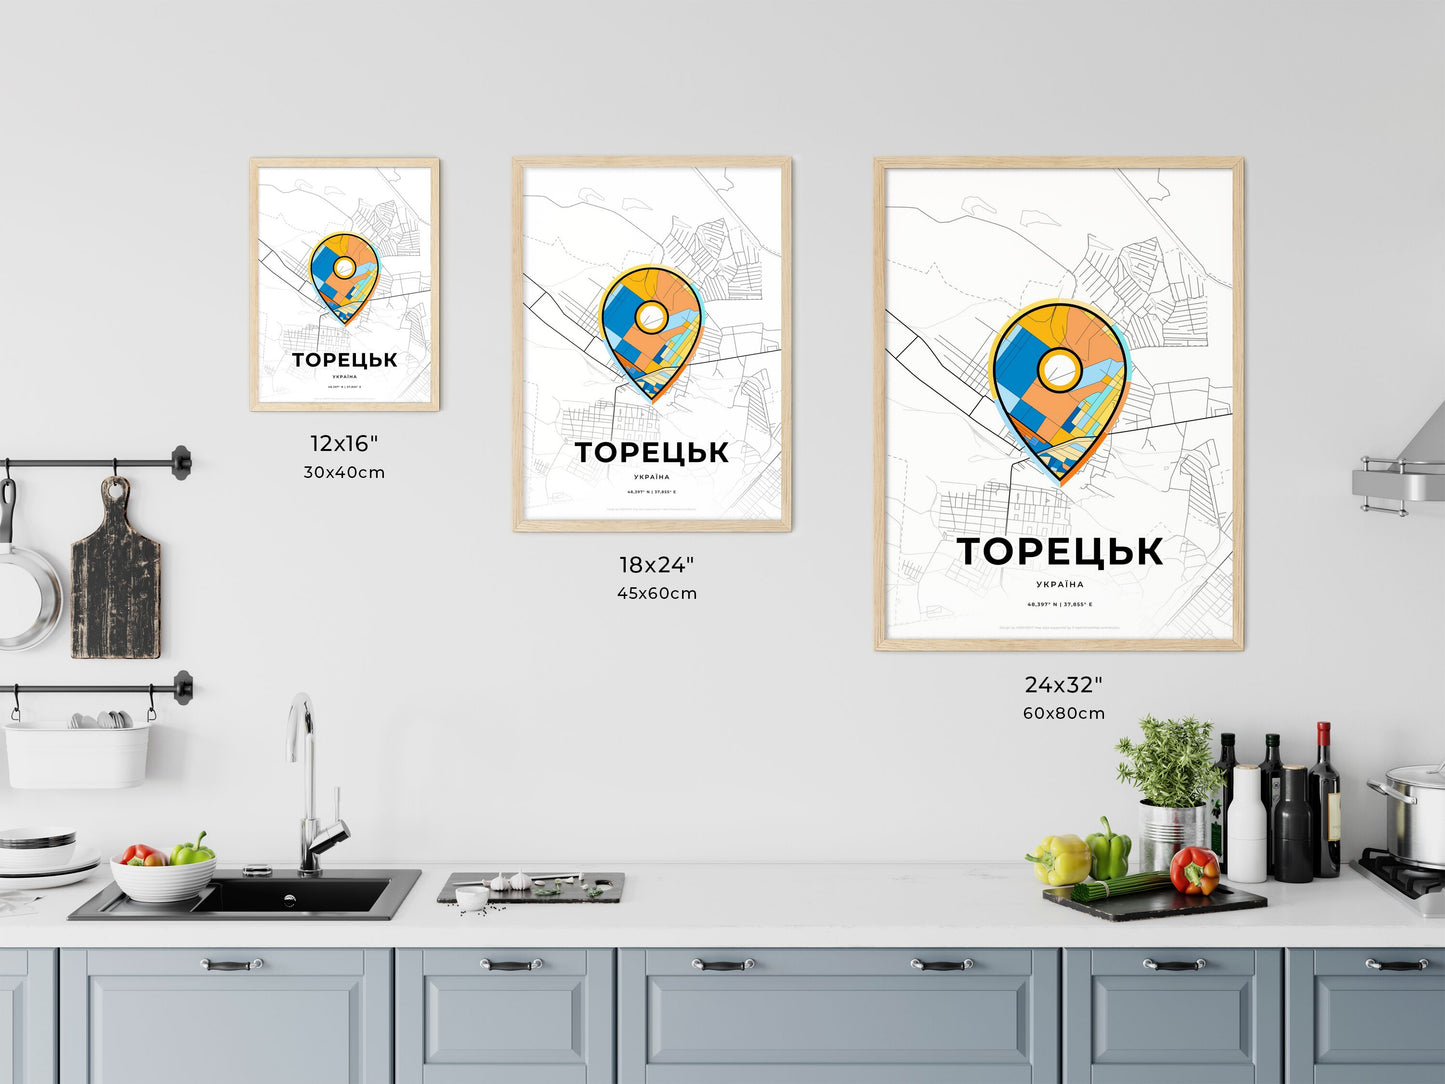 TORETSK UKRAINE minimal art map with a colorful icon. Where it all began, Couple map gift.